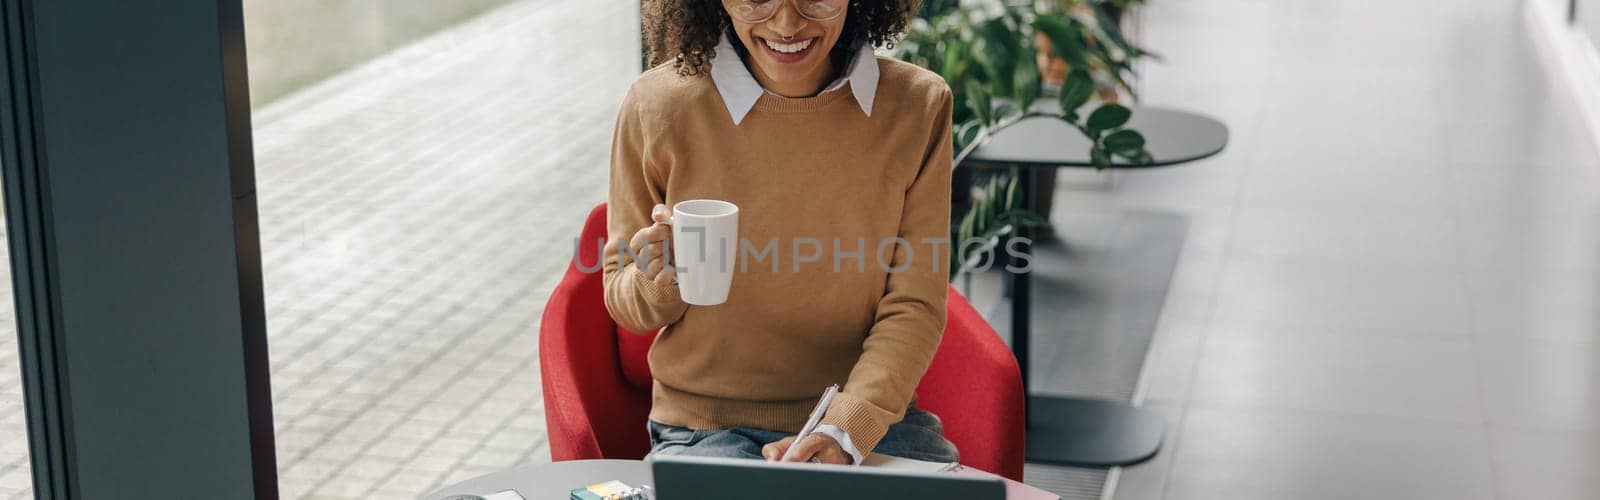 Smiling woman entrepreneur working on laptop, making notes in cozy coworking space interior by Yaroslav_astakhov